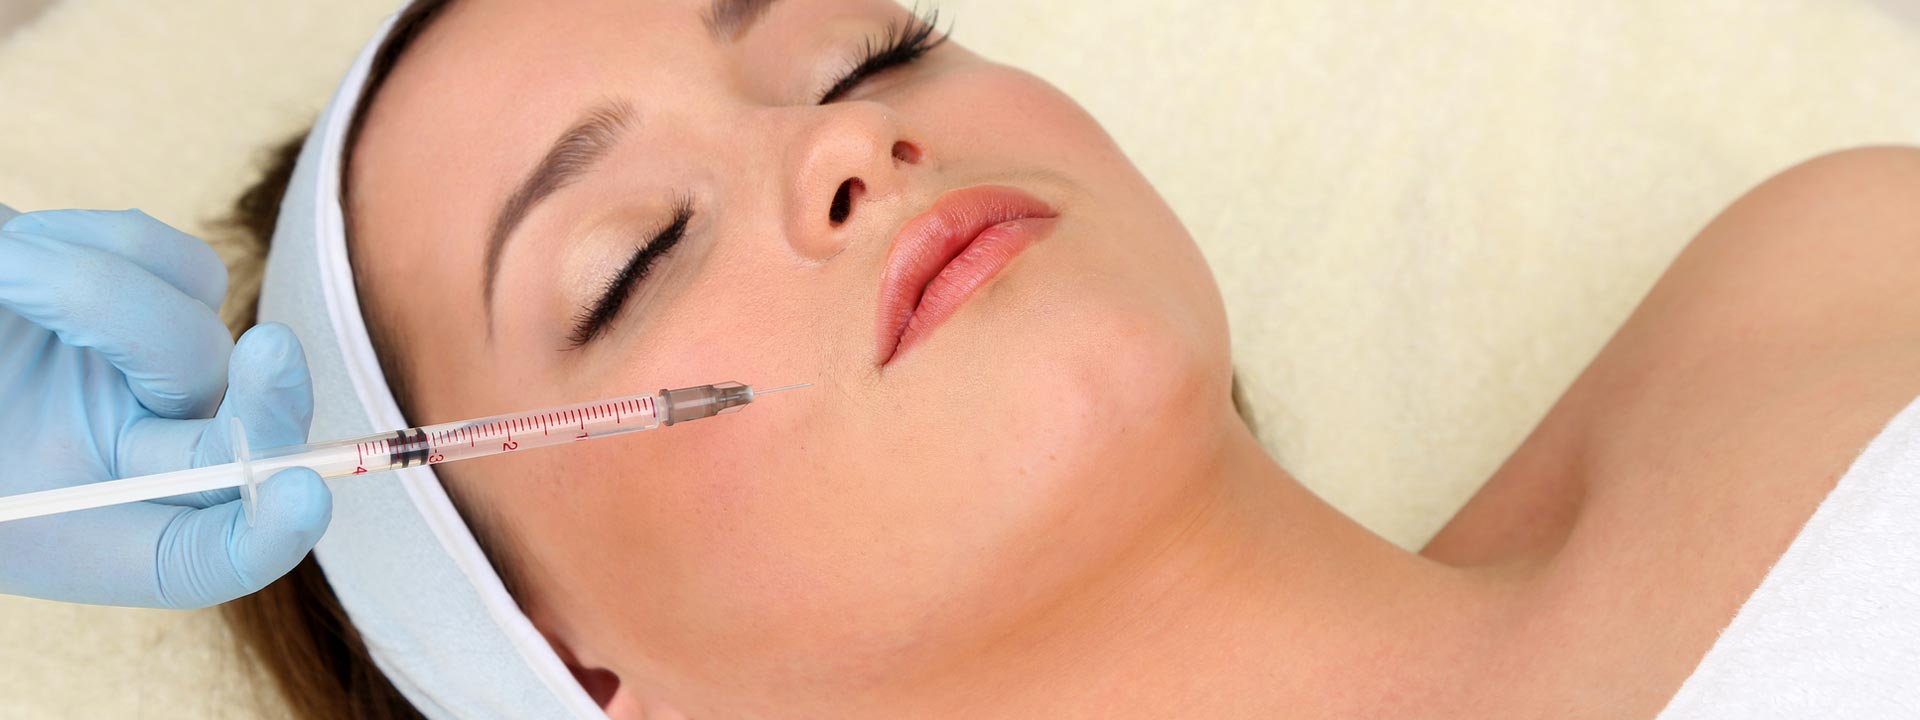 A woman getting botox injection